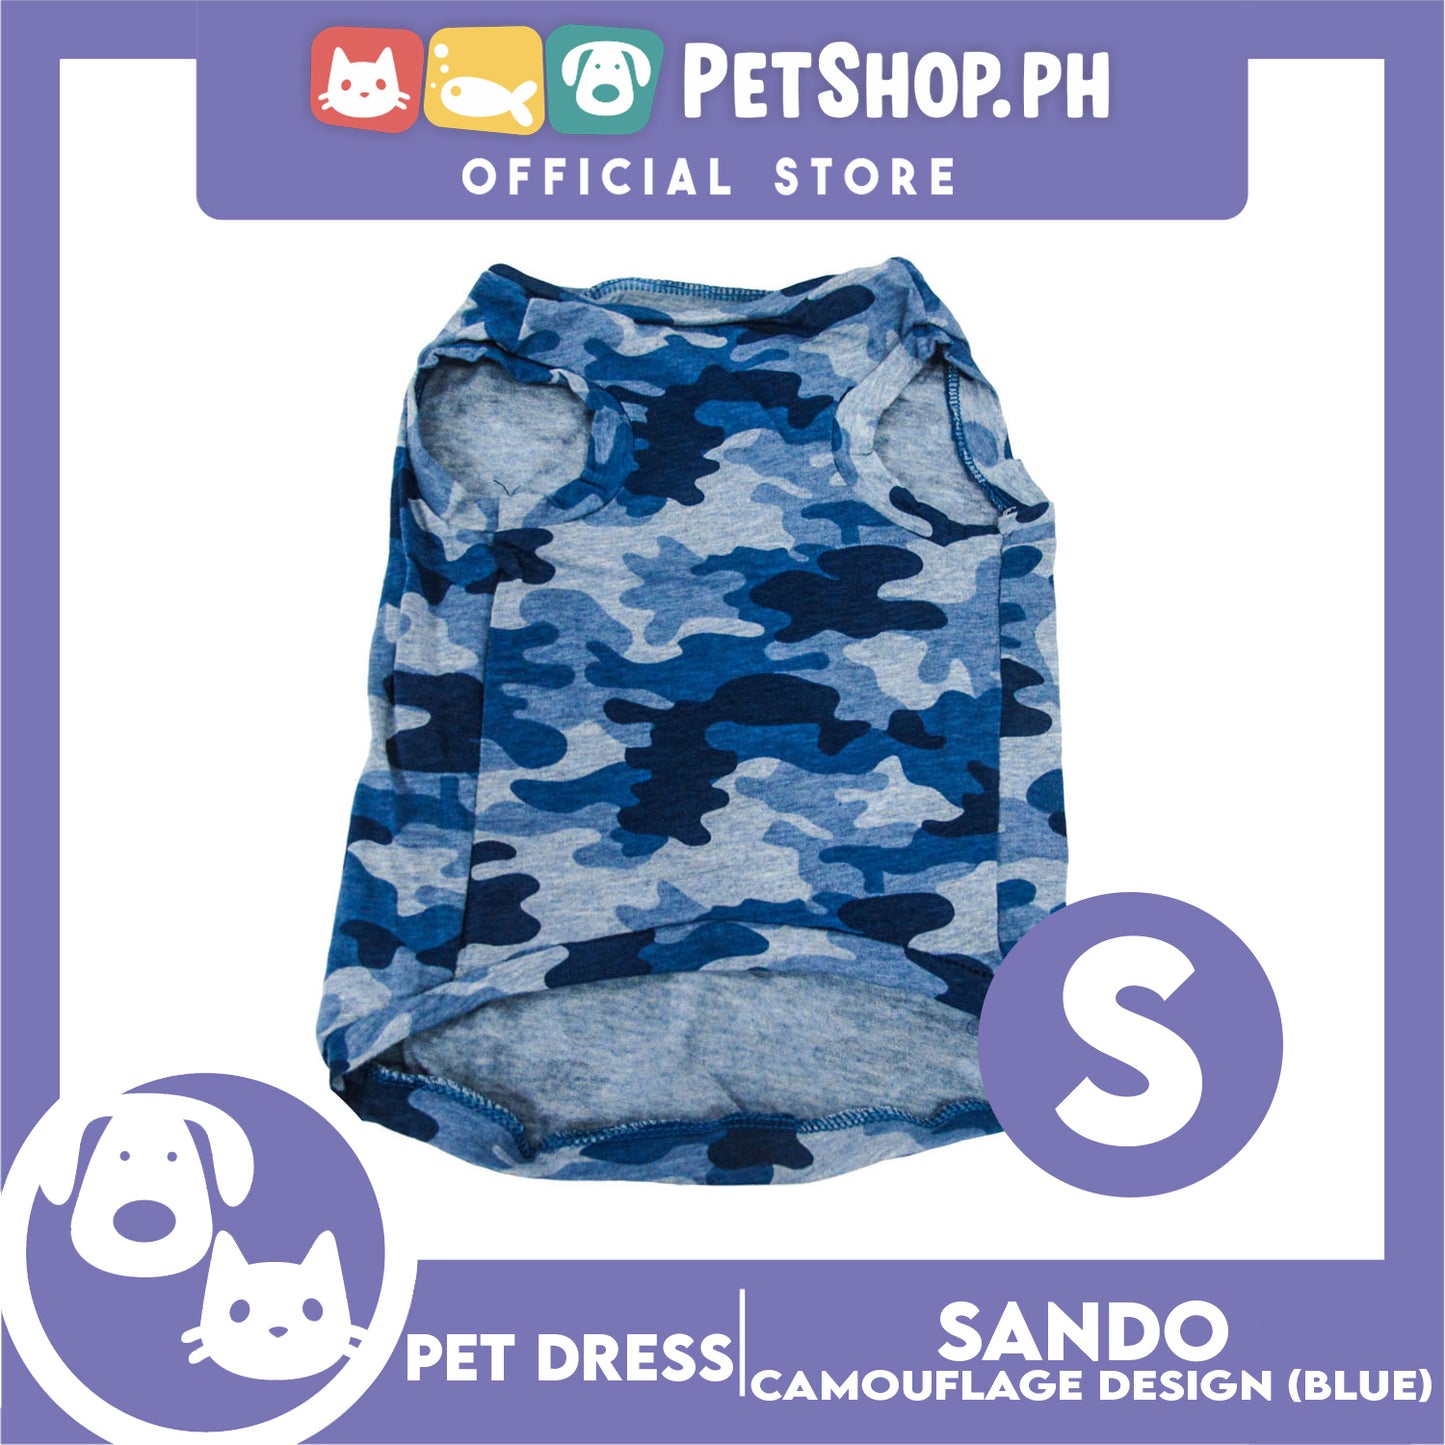 Pet Shirt Camouflage Design Sleeveless Blue (Small) for Puppy, Small Dogs and Cats- Sando Breathable Clothes, Pet T-shirt